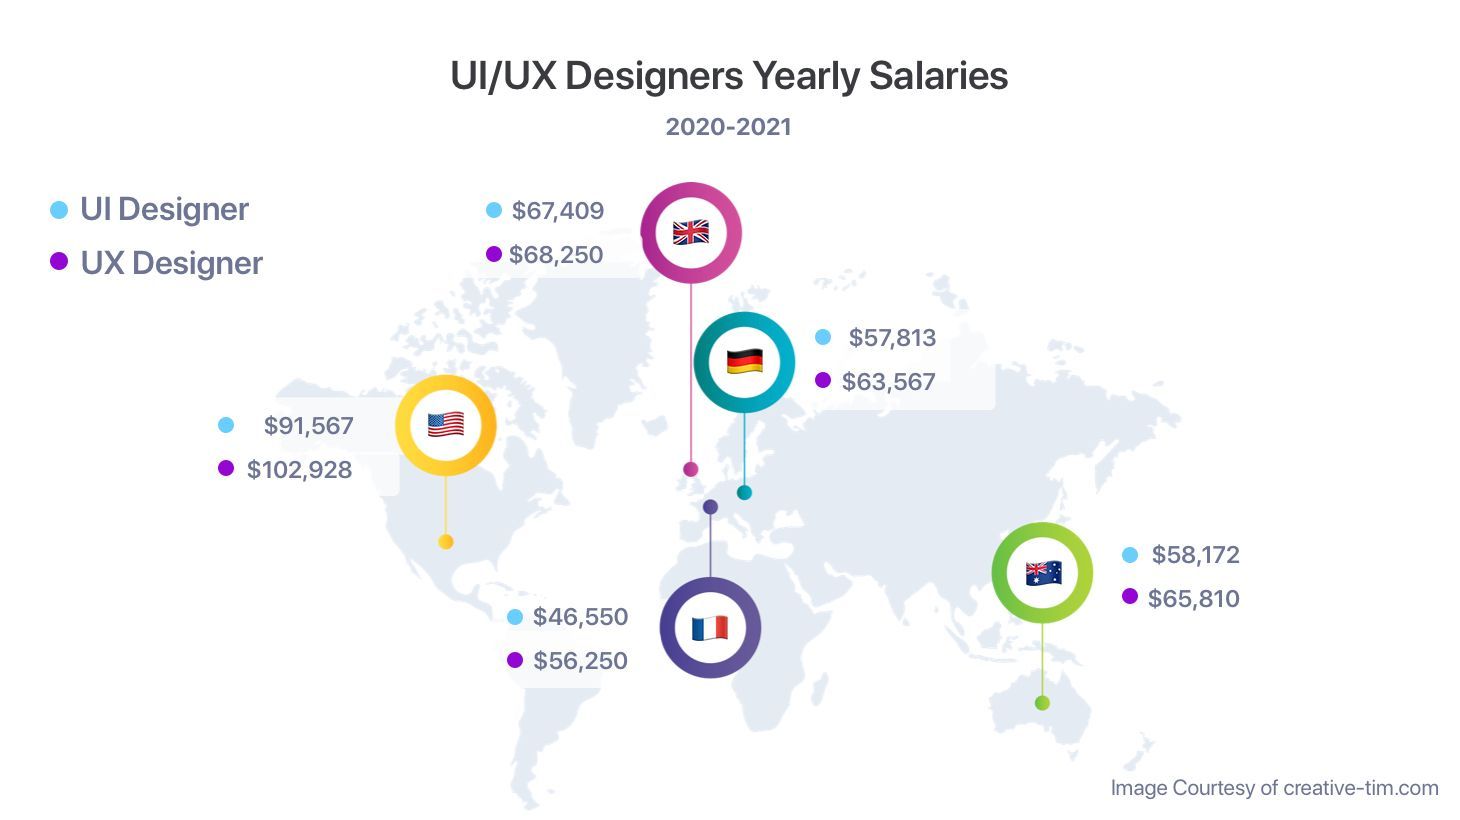 A map showing different UI/UX designer salaries in different parts of the world.